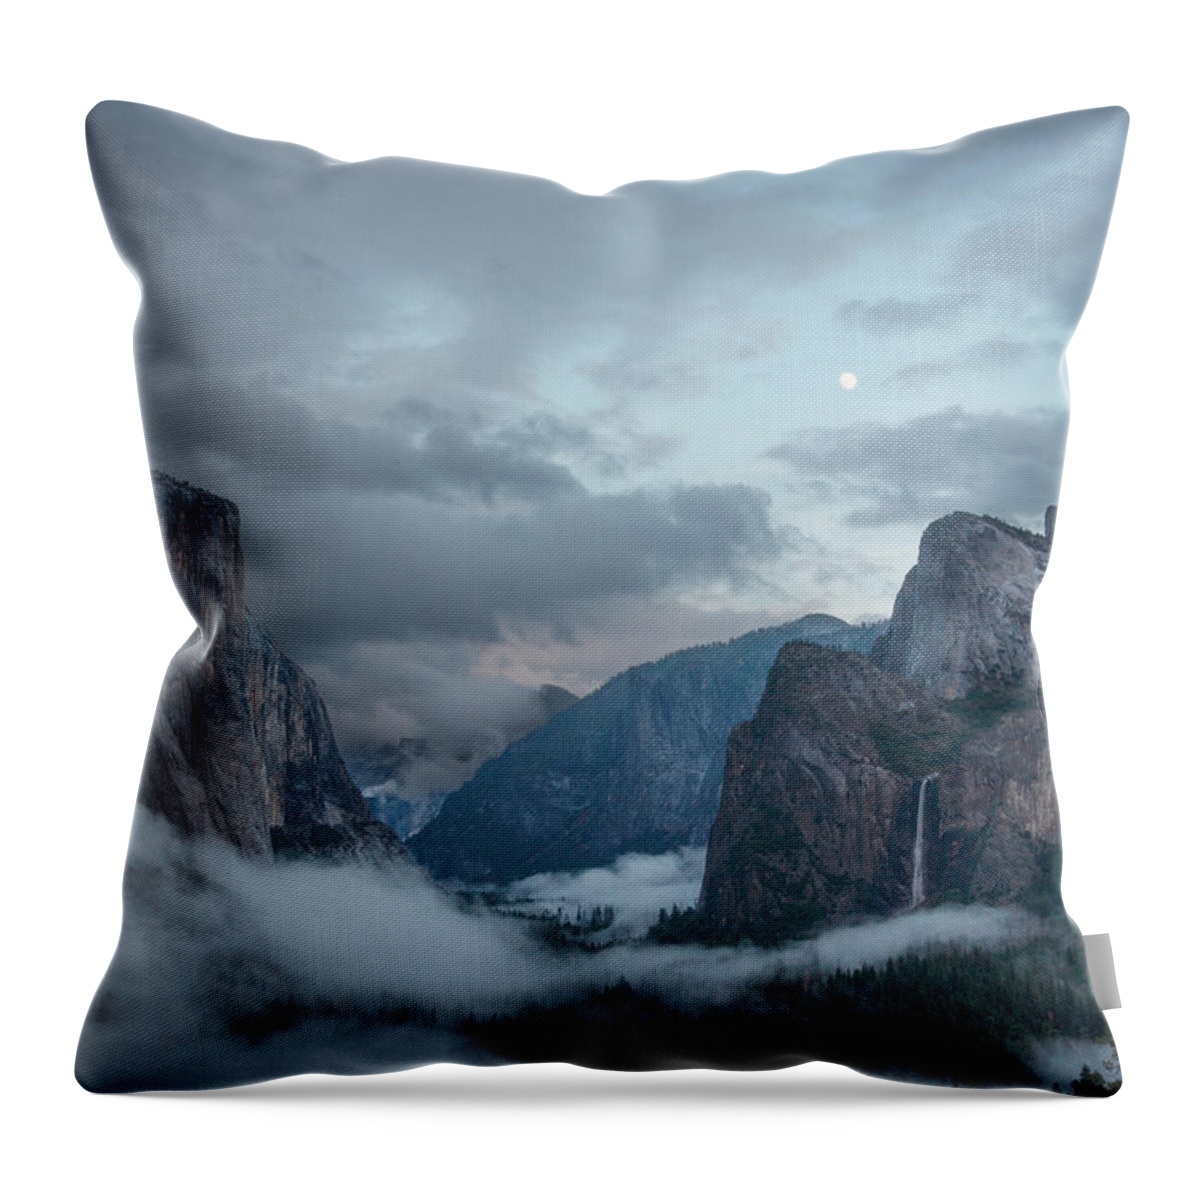 Bridal Veil Buttress Throw Pillow featuring the photograph Moon Rise Yosemite by Bill Roberts